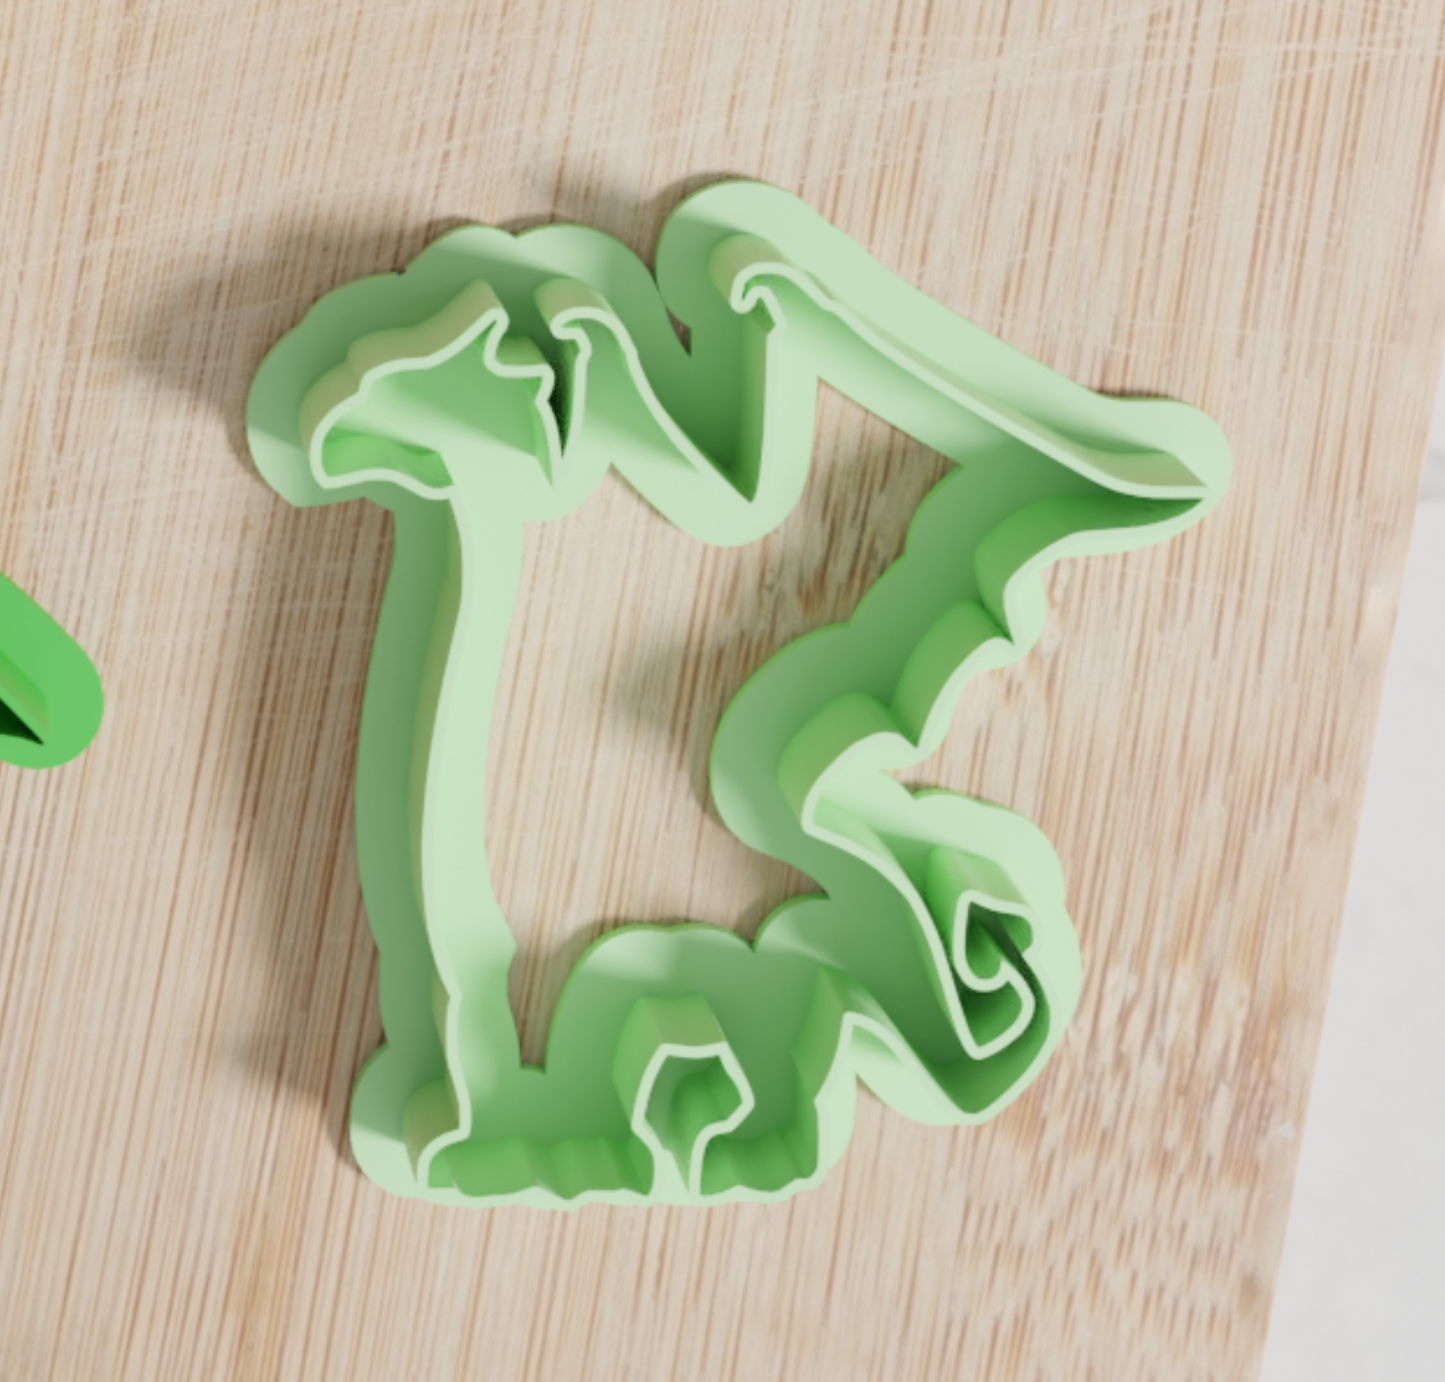 Dragon Cookie Cutters. Set of 6 Premium Dragon Cookie Cutters. Four Sizes, Tons Of Colors!